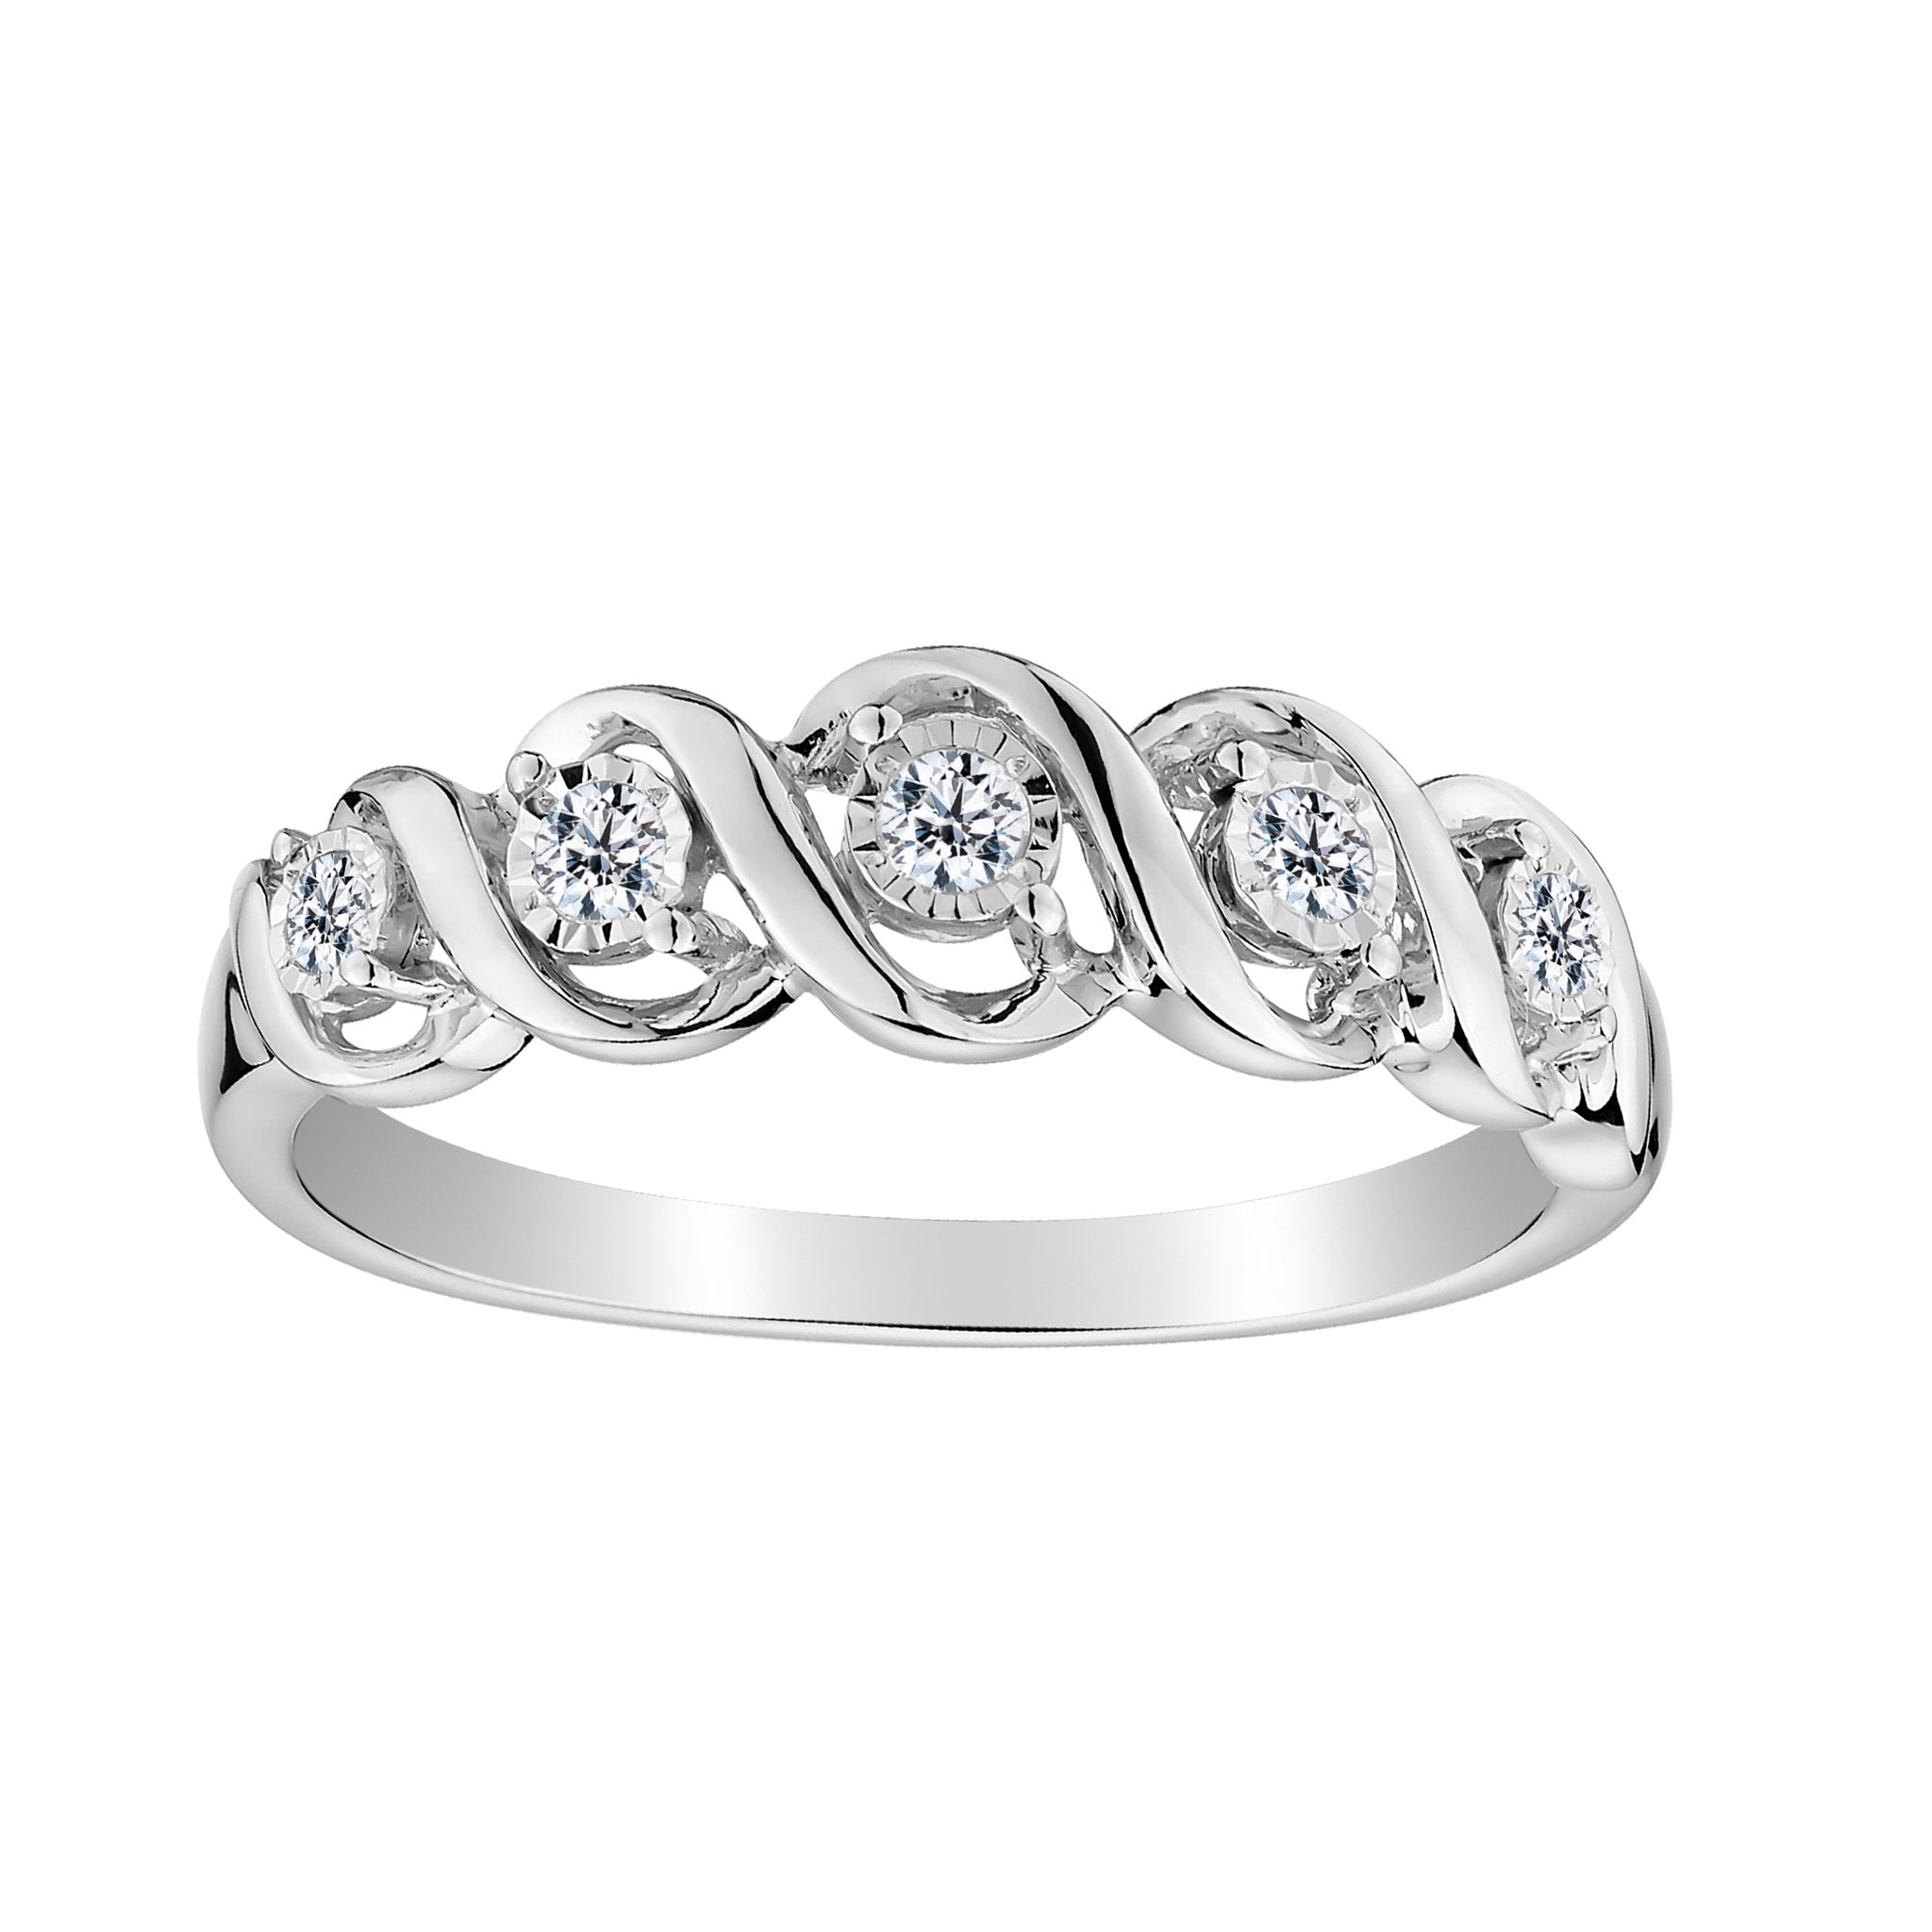 .15 CARAT DIAMOND RING, 10kt WHITE GOLD. Fashion Rings - Griffin Jewellery Designs